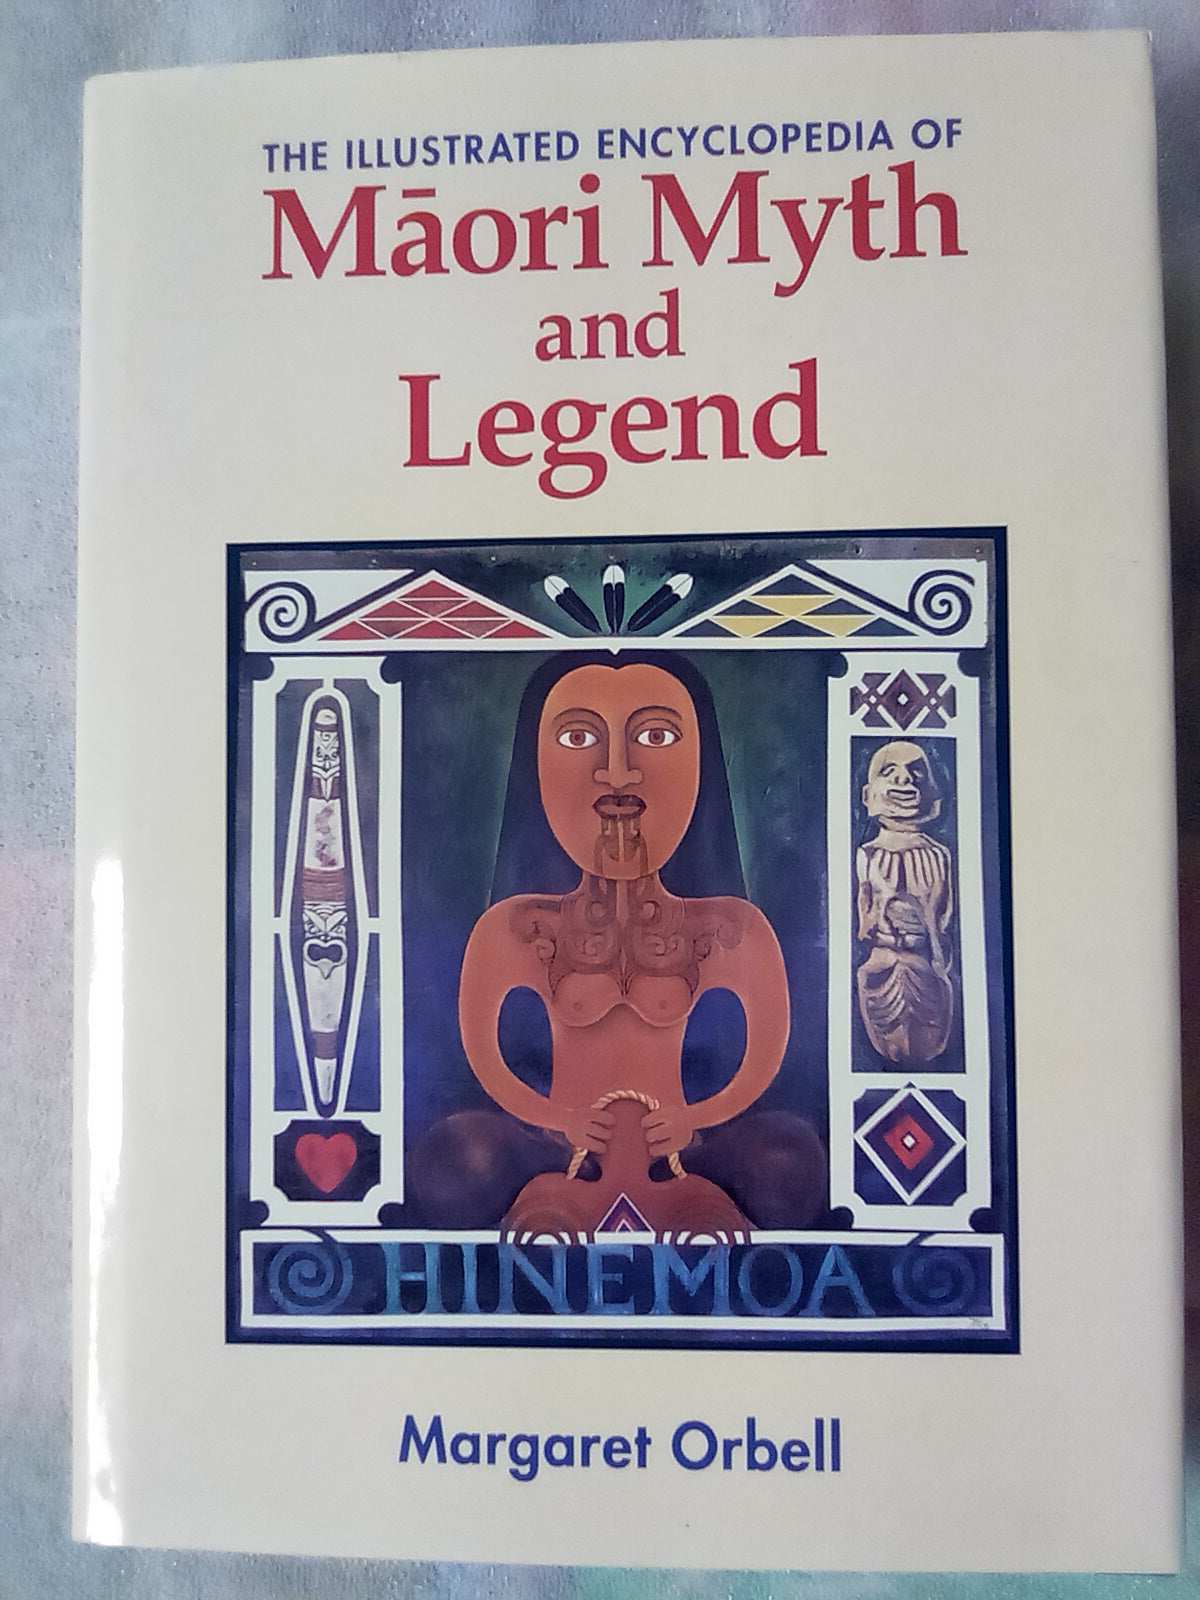 The Illustrated Encyclopedia of Maori Myth and Legend by Margaret Orbell